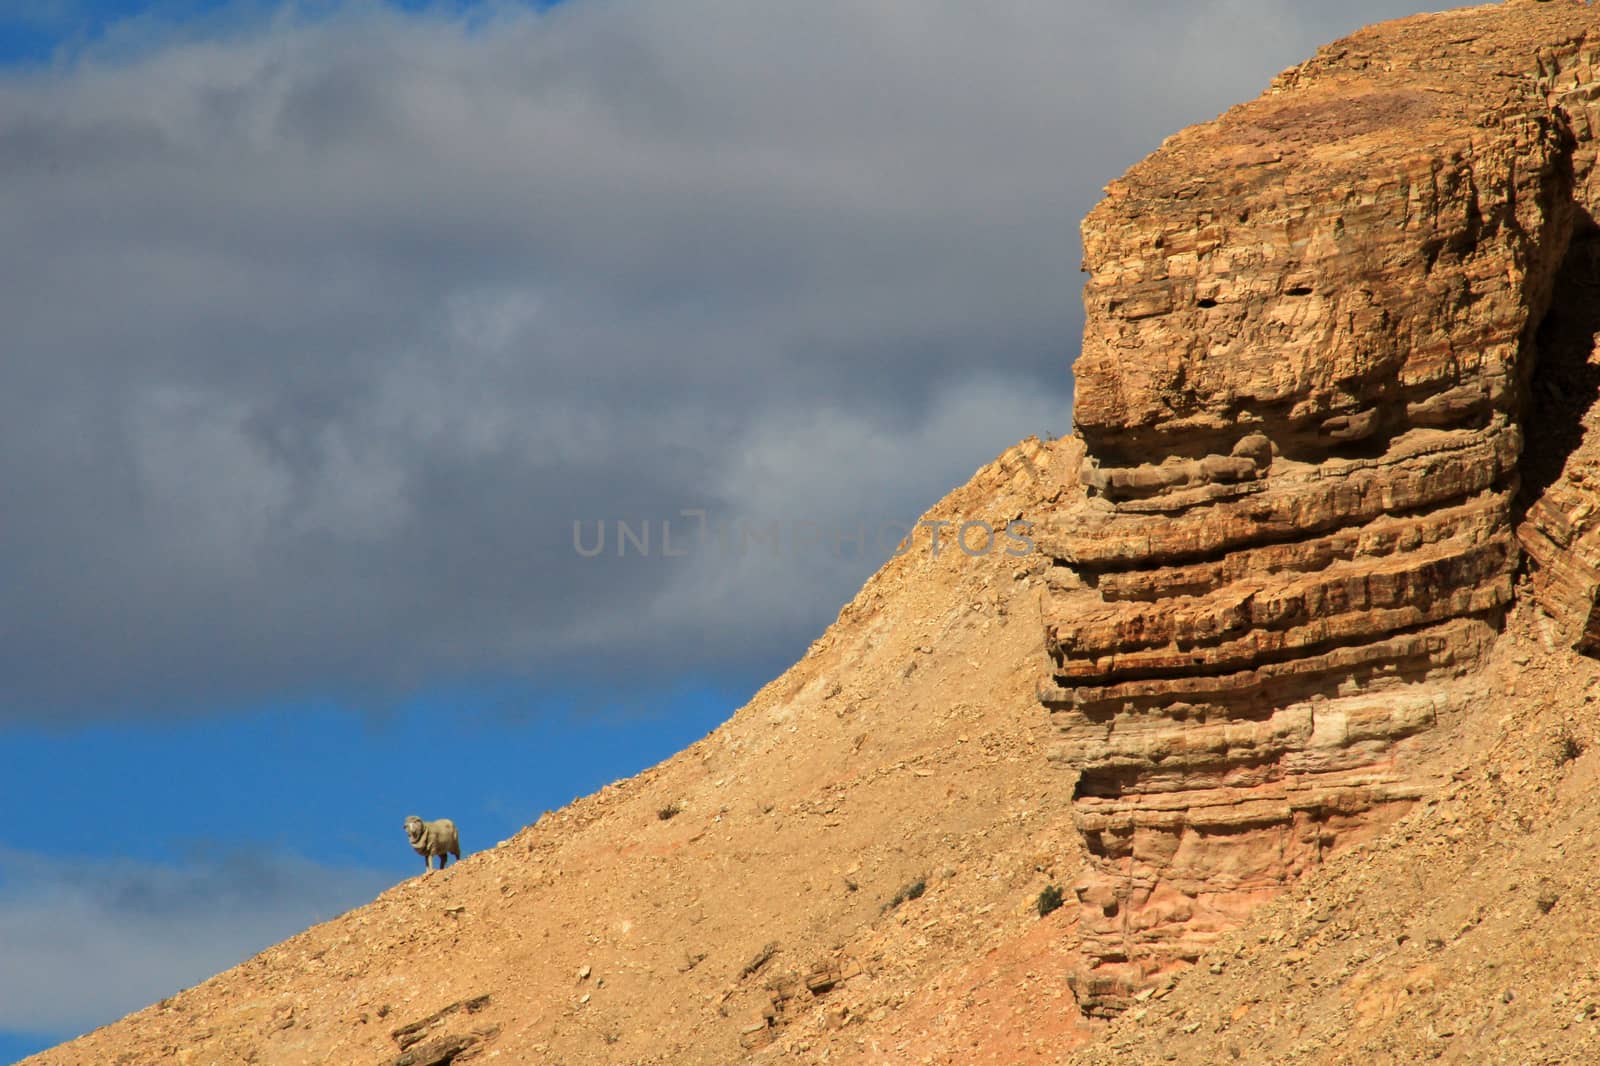 A lonely sheep on the horizon, Chubut, Argentina by cicloco